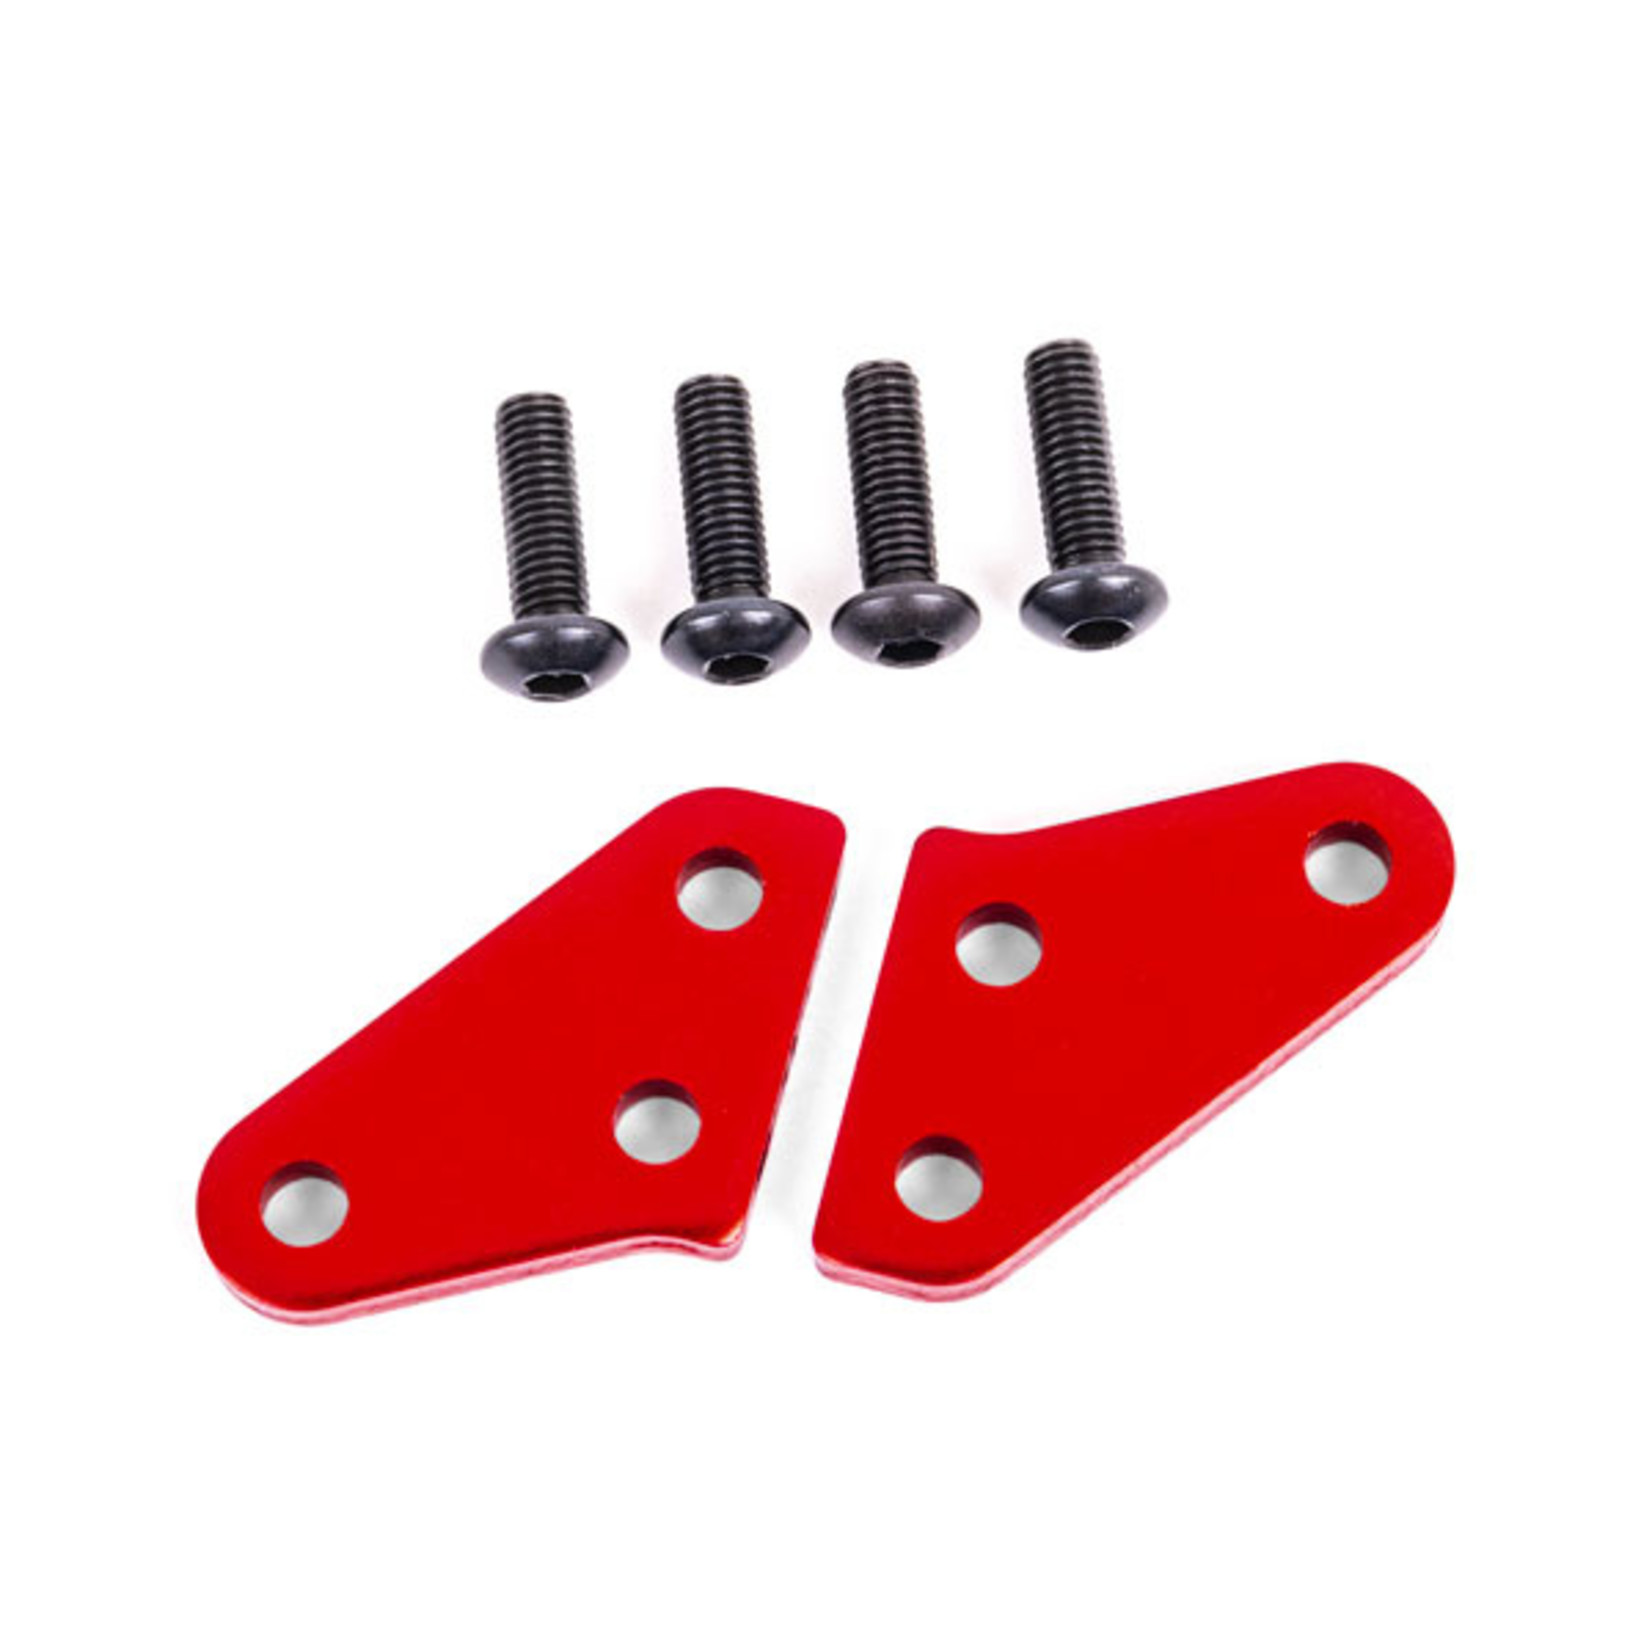 Traxxas 9636R - Steering block arms (aluminum, red-anodize